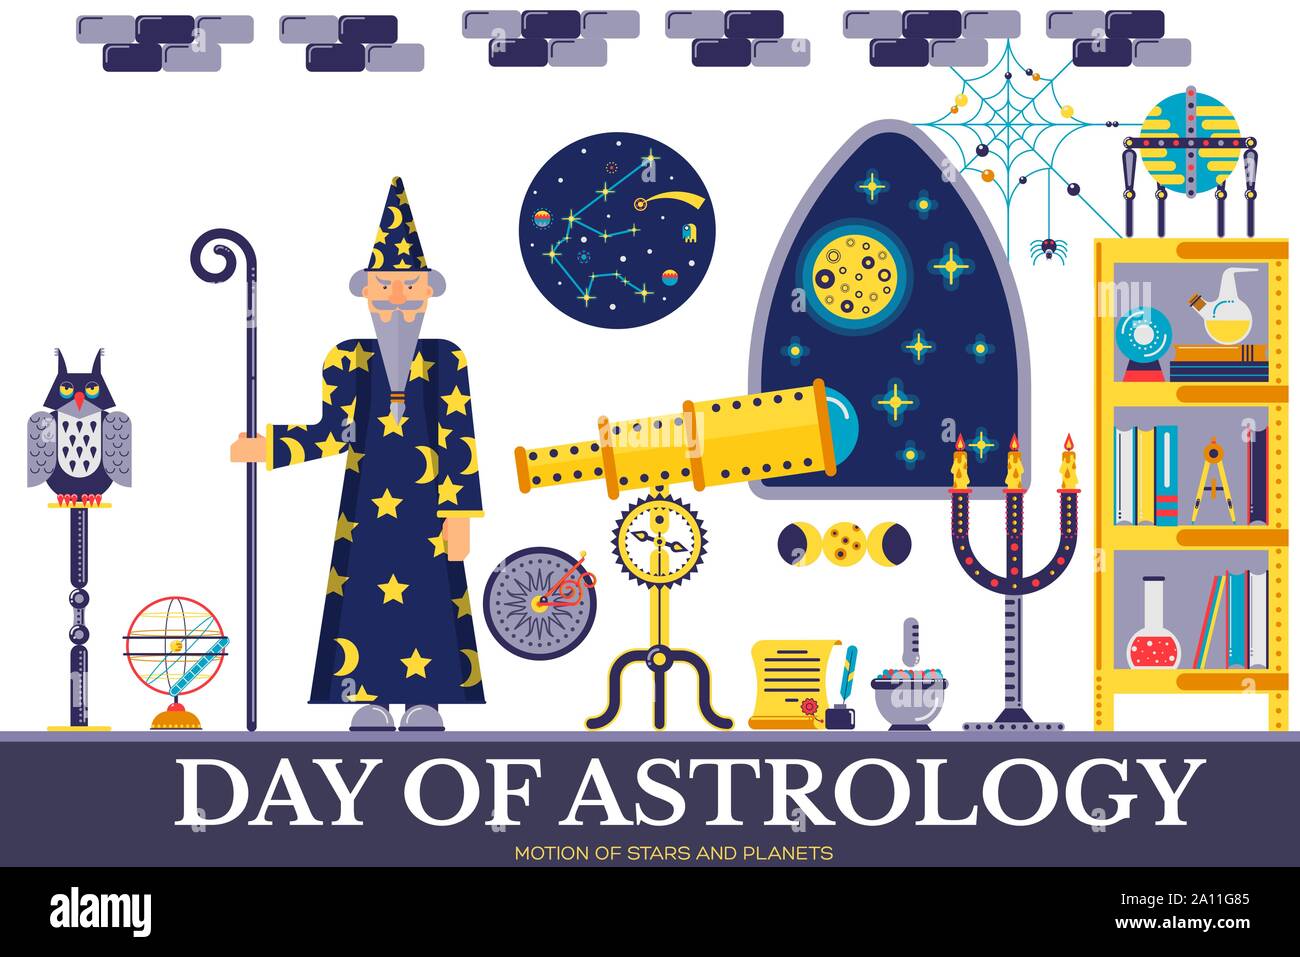 Senior astrologer with beard in hat standing in lab. Ancient alchemy tools and equipment: telescope, globe, bulbs, crystal ball, books are in room. Vector flat magic wizard objects. Stock Vector